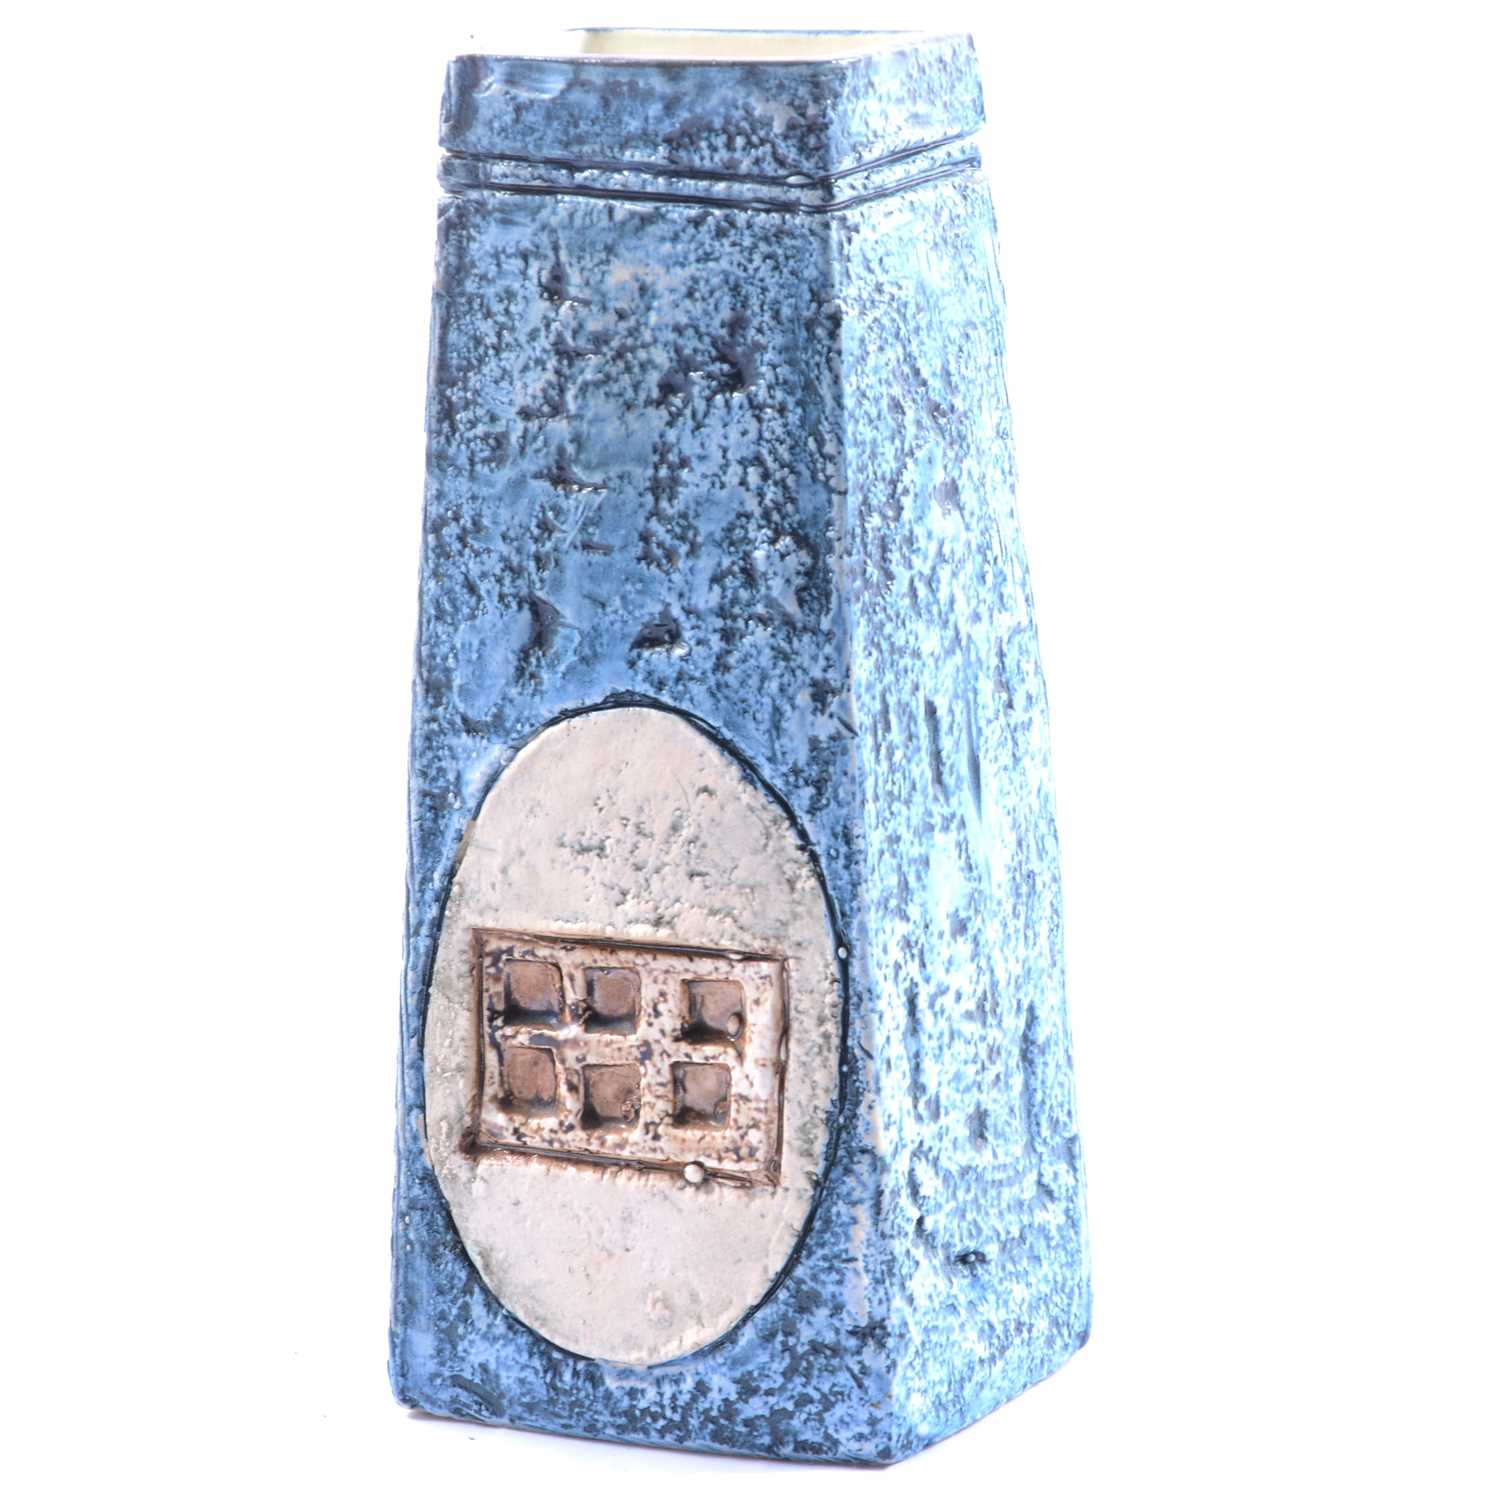 Louise Jinks for Troika Pottery, a textured Coffin vase